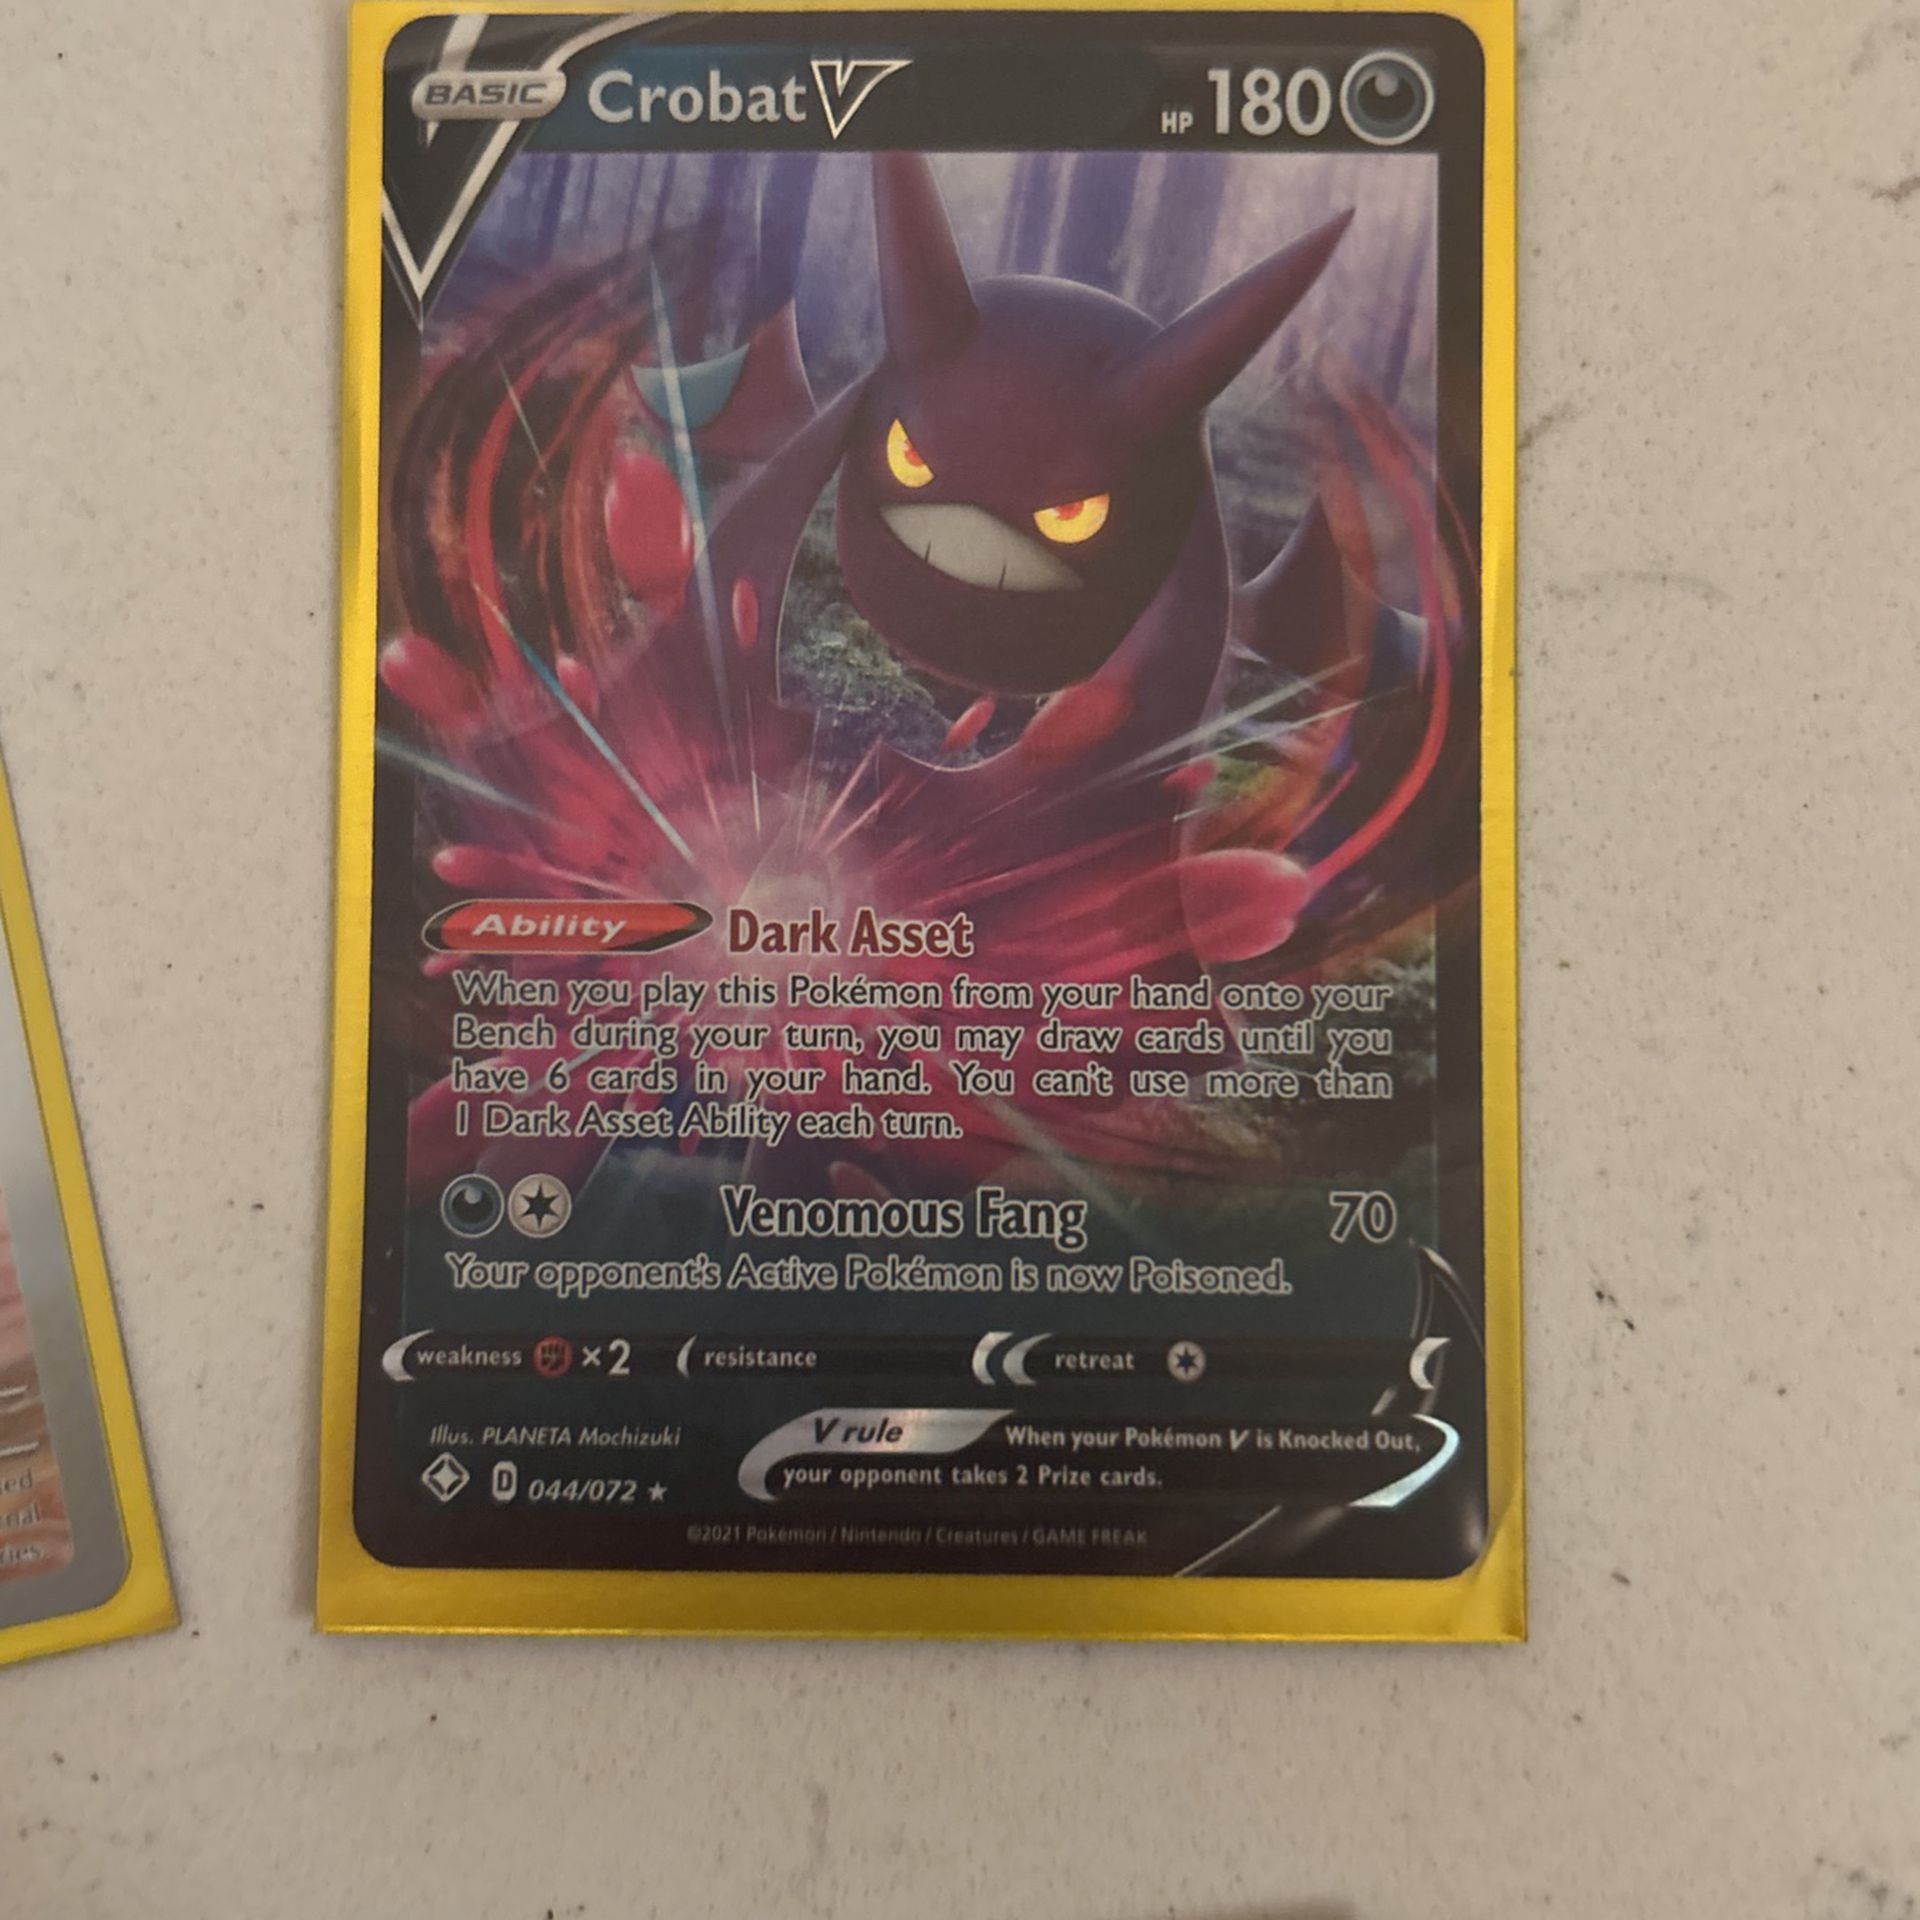 Crobat V Pokémon Collectible Send An Offer Nothing Free